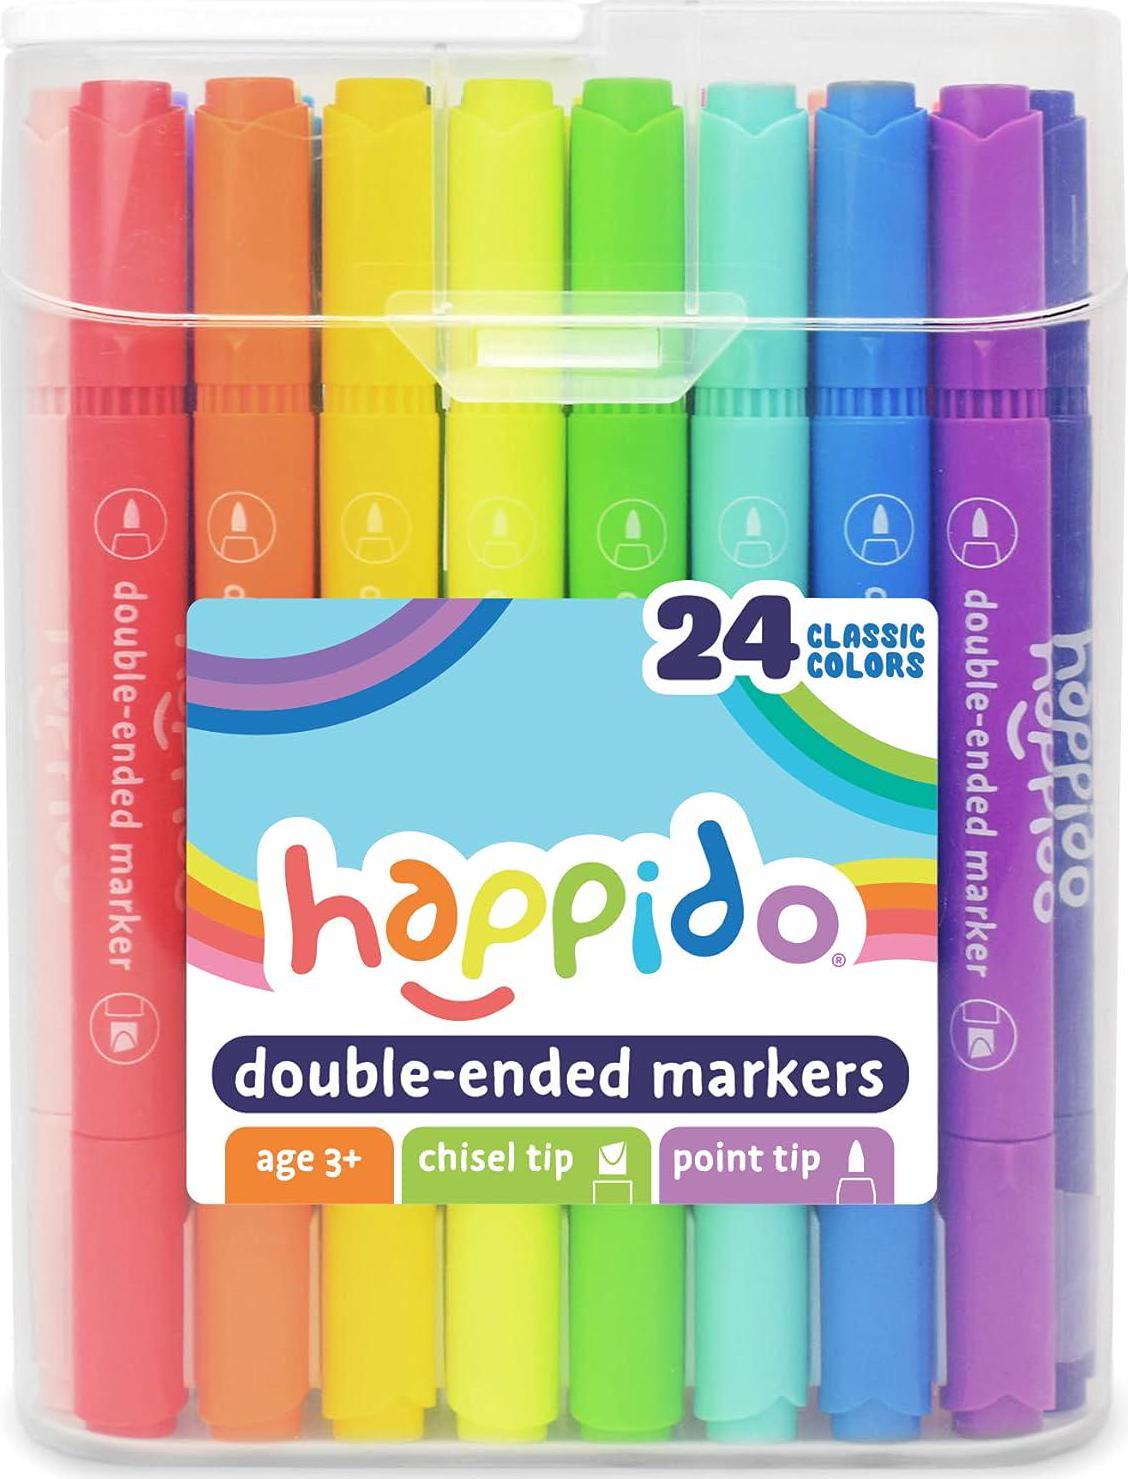 Painting Marker Pen Double Sided Markers 24 Colors Double Sided